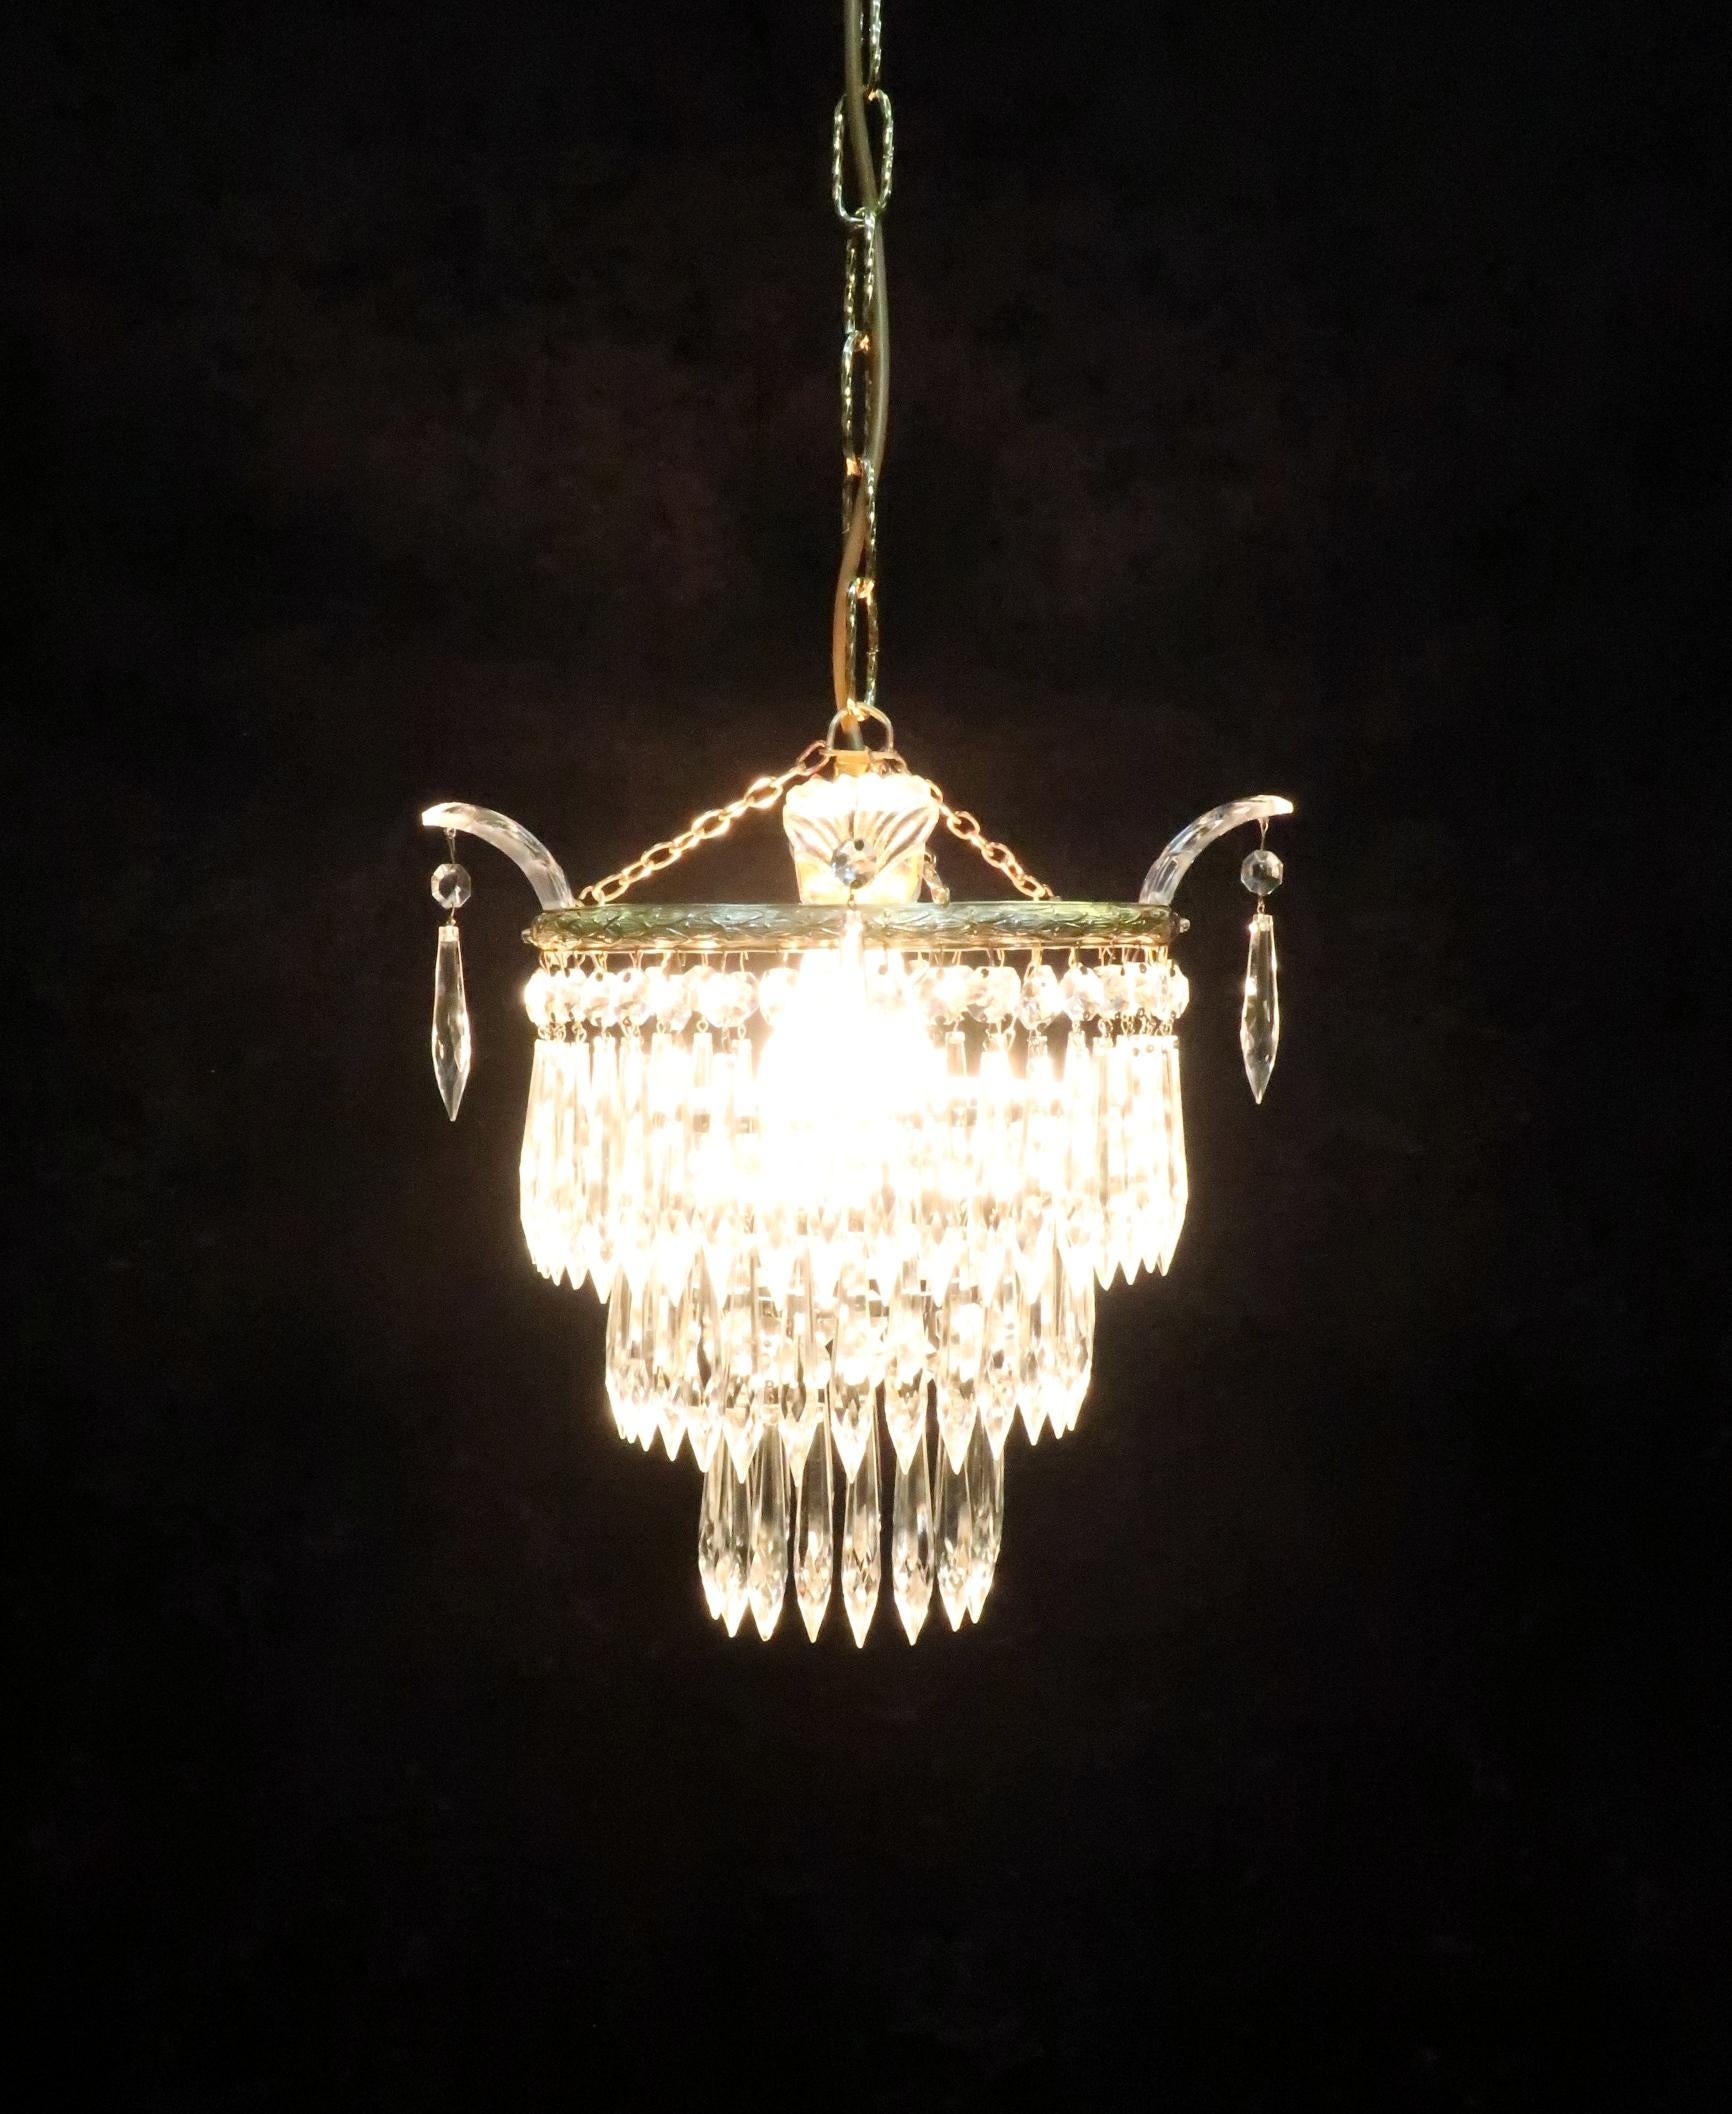 A very good quality ?Italian Art Deco chandelier with three tiers of crystal glass icicle droplets and crystal glass leaves to the top with decorative brass frame on an adjustable 12 inch chain. The brass has been cleaned and lacquered and the light